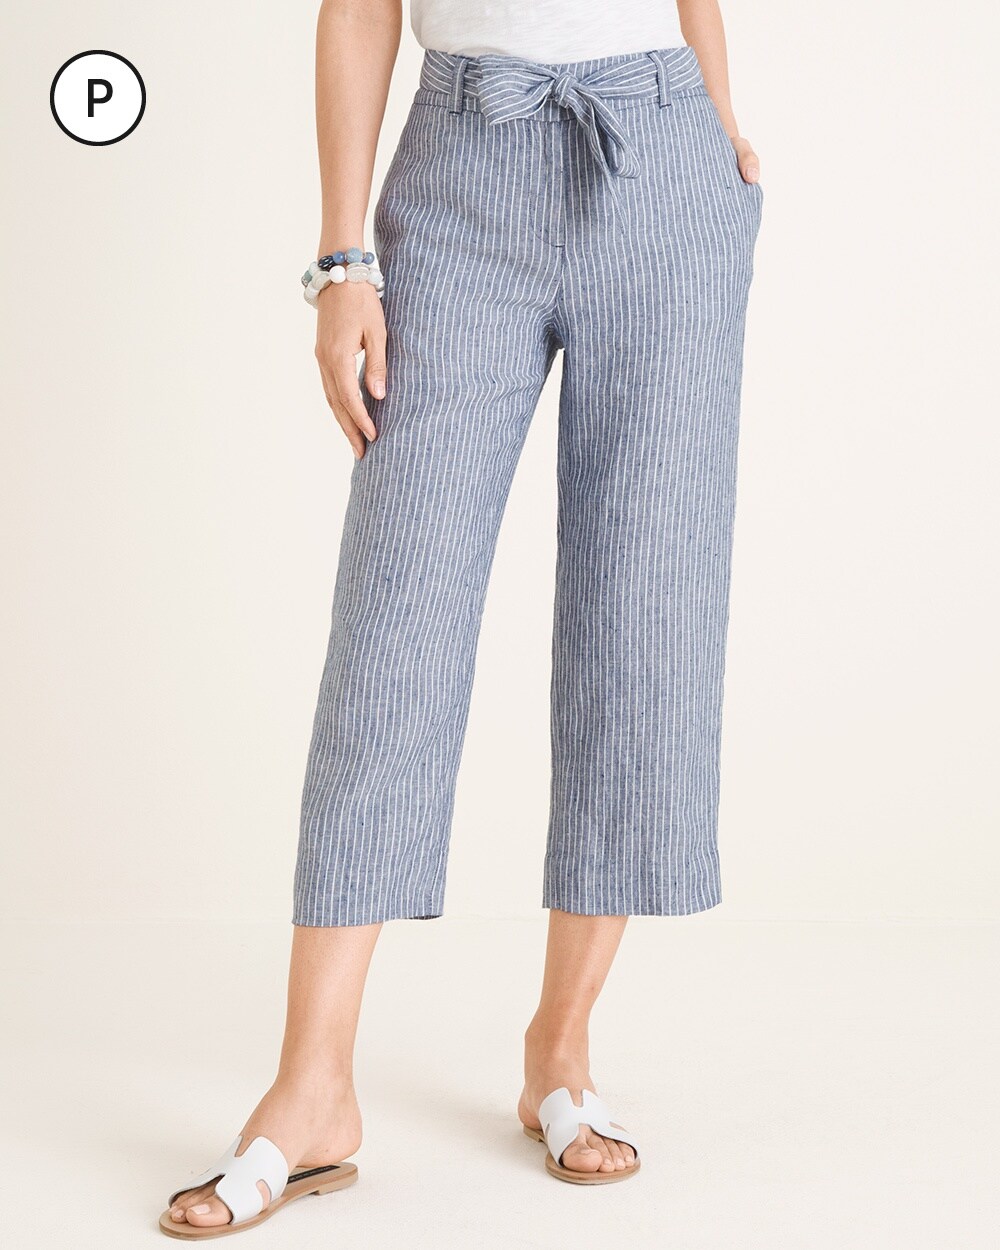 Petite Belted Striped Linen Crops